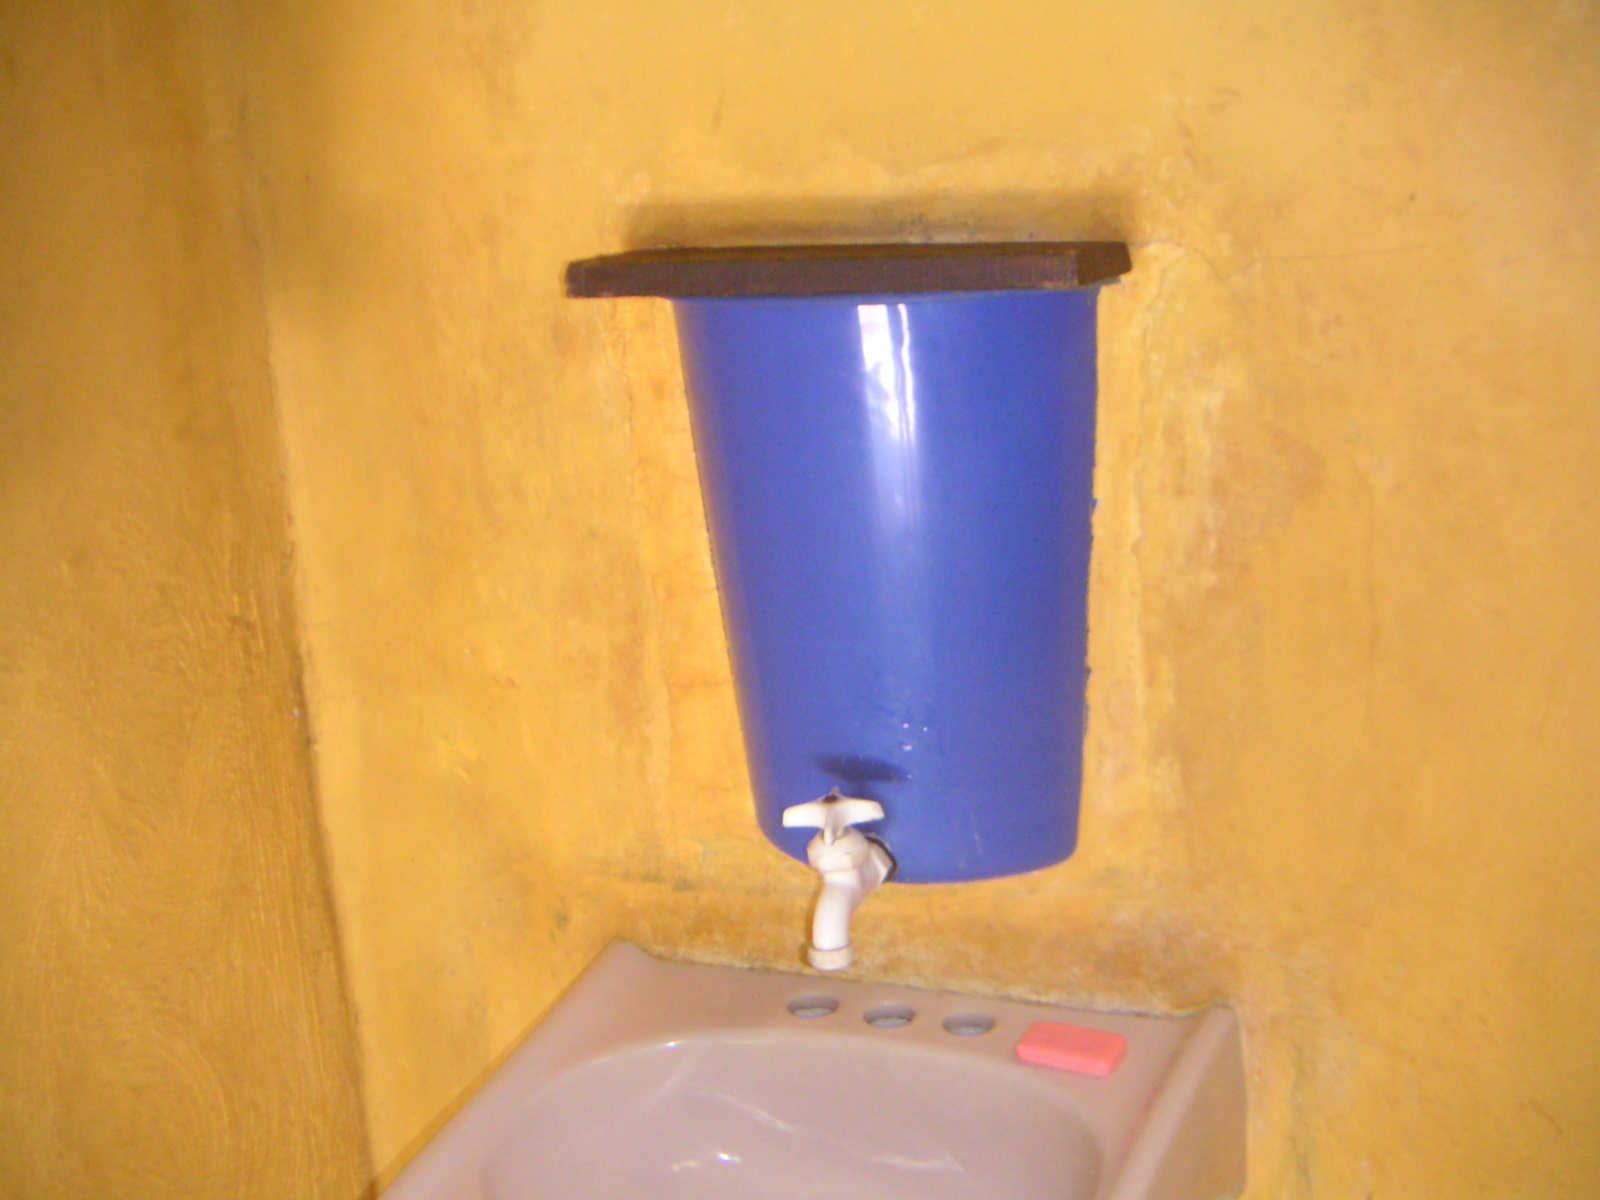 webPICT
72 water bucket built into wall
